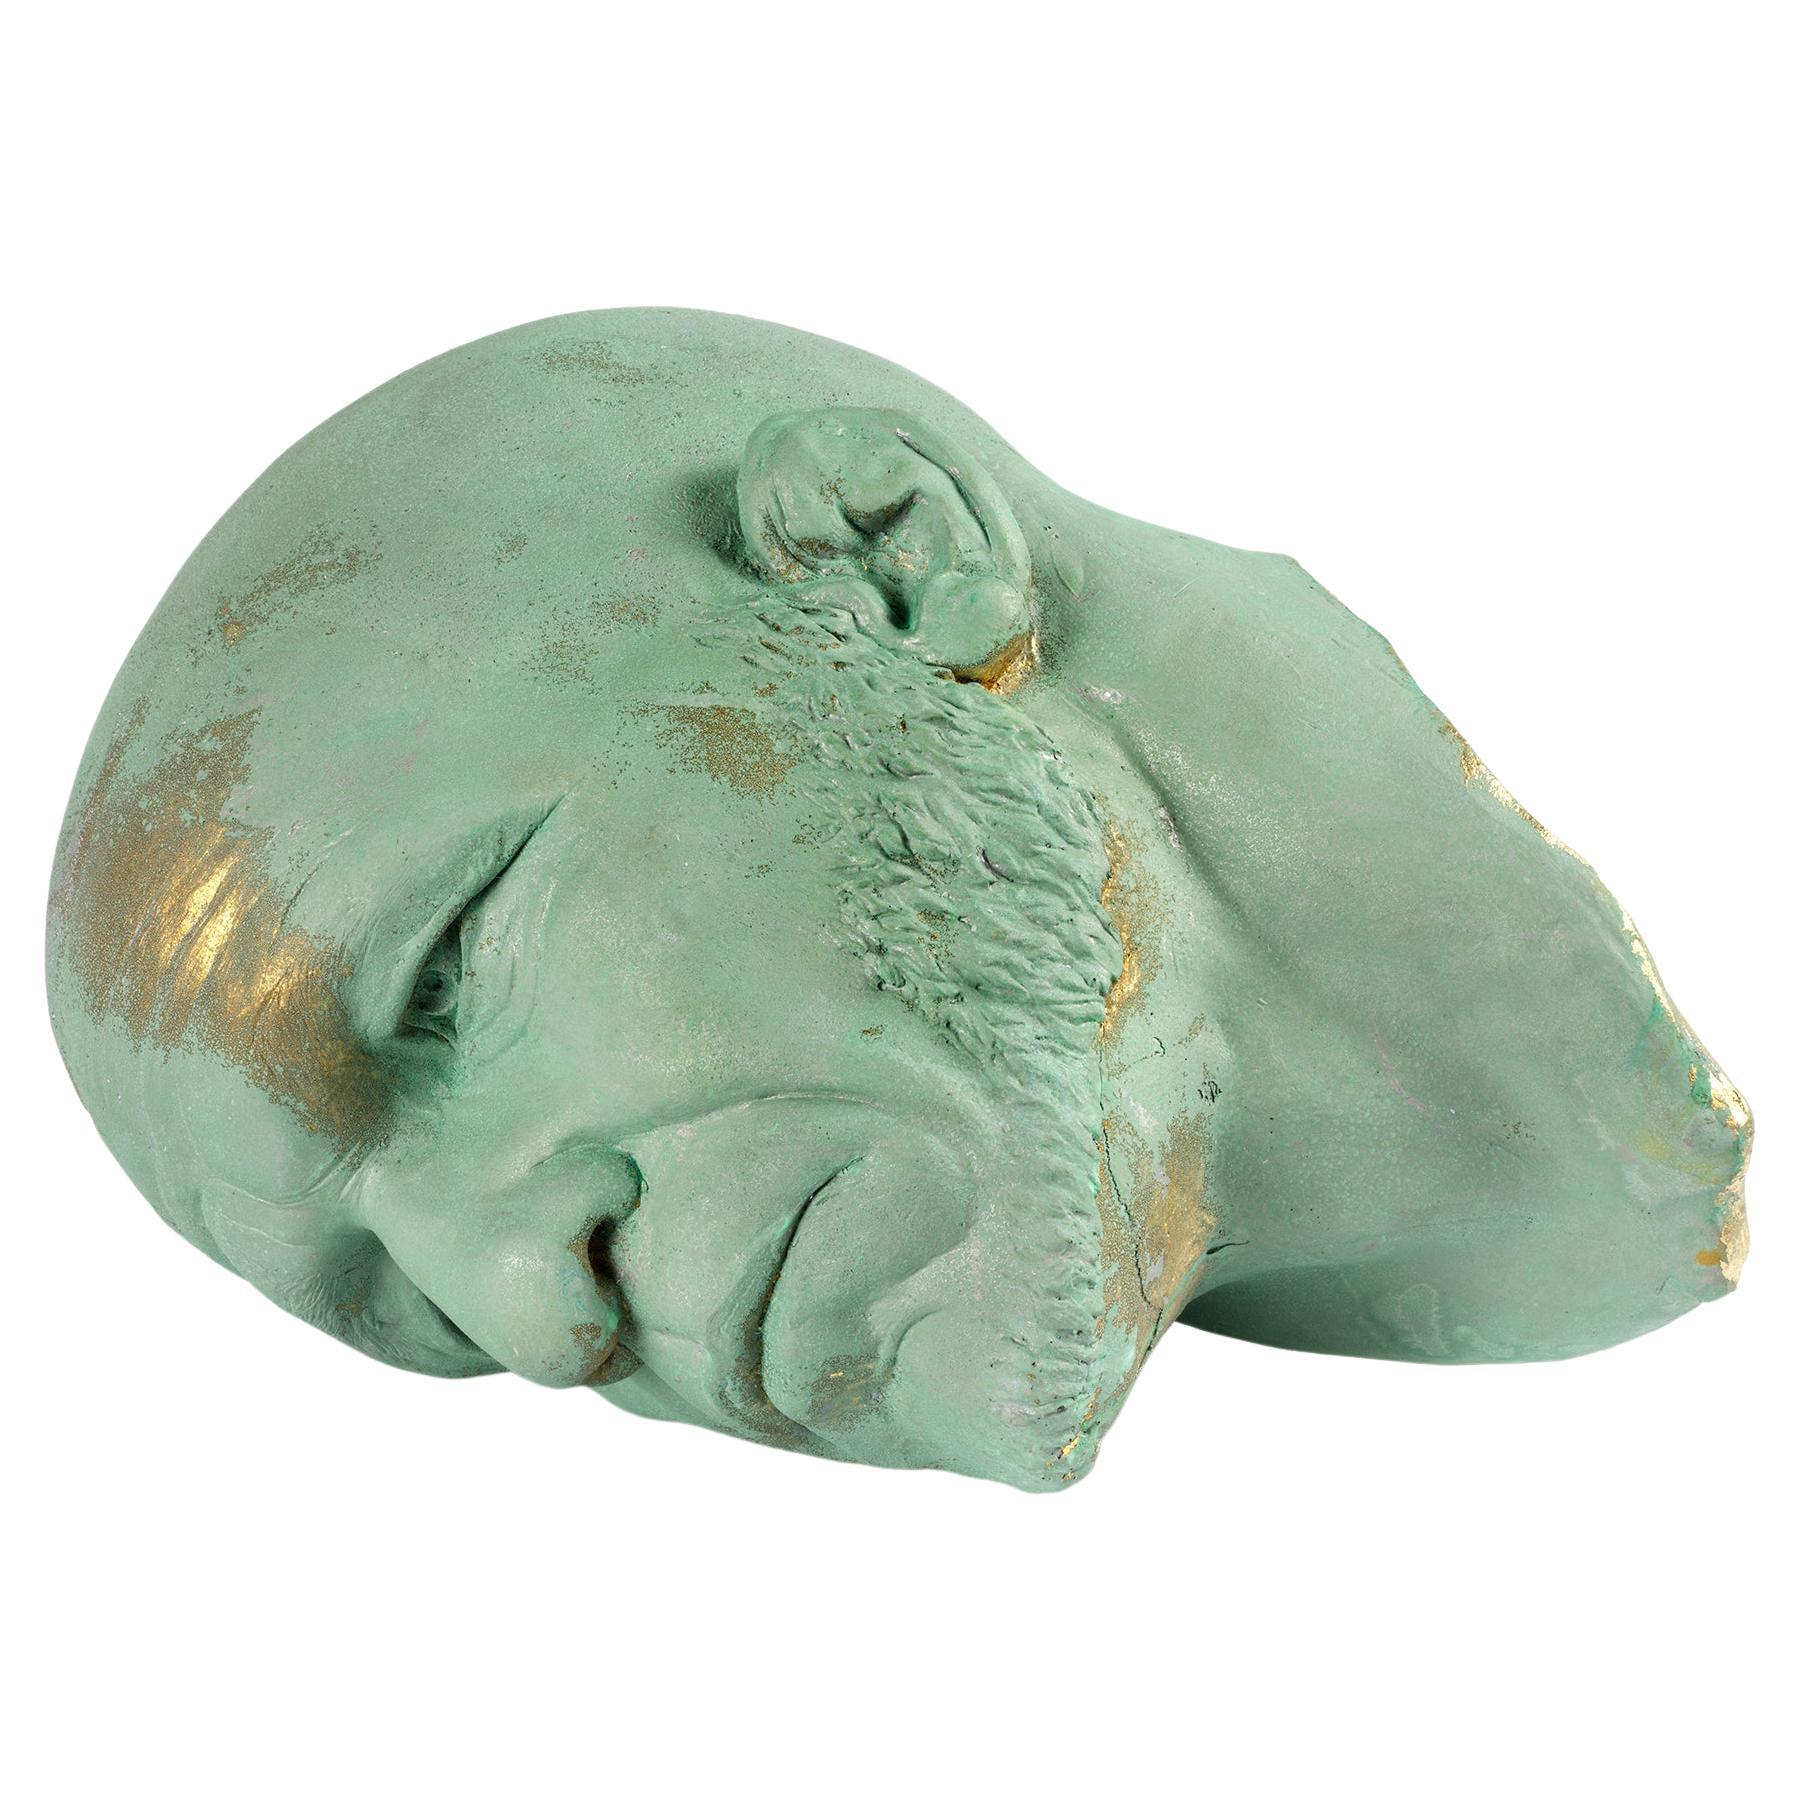 The Black Road: Verdigris, Classical Male Bust, Resin, Patina and Gold Leaf